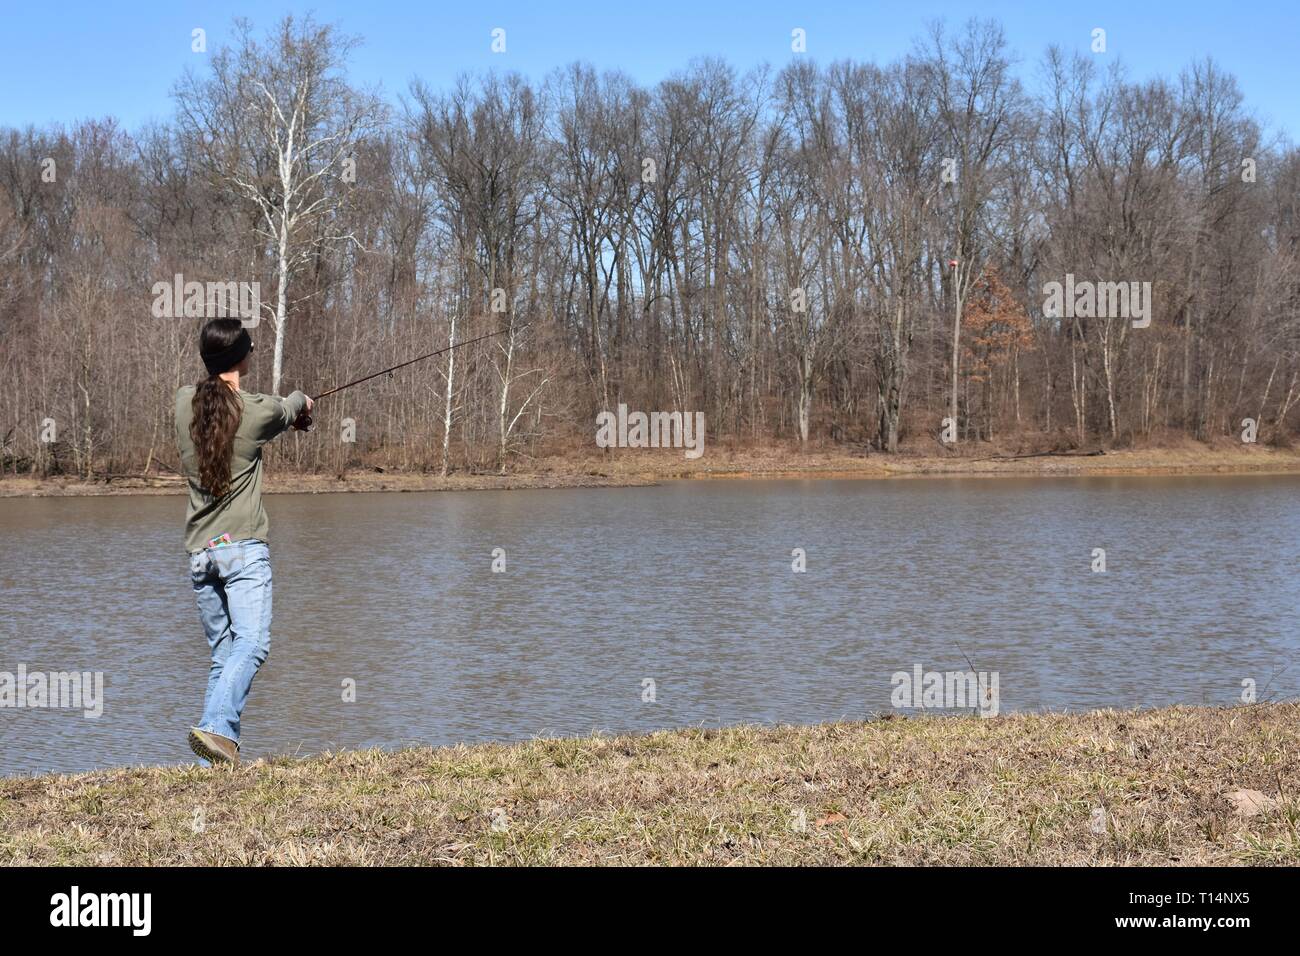 Young woman casting a line into a lake from her fishing pole Stock Photo